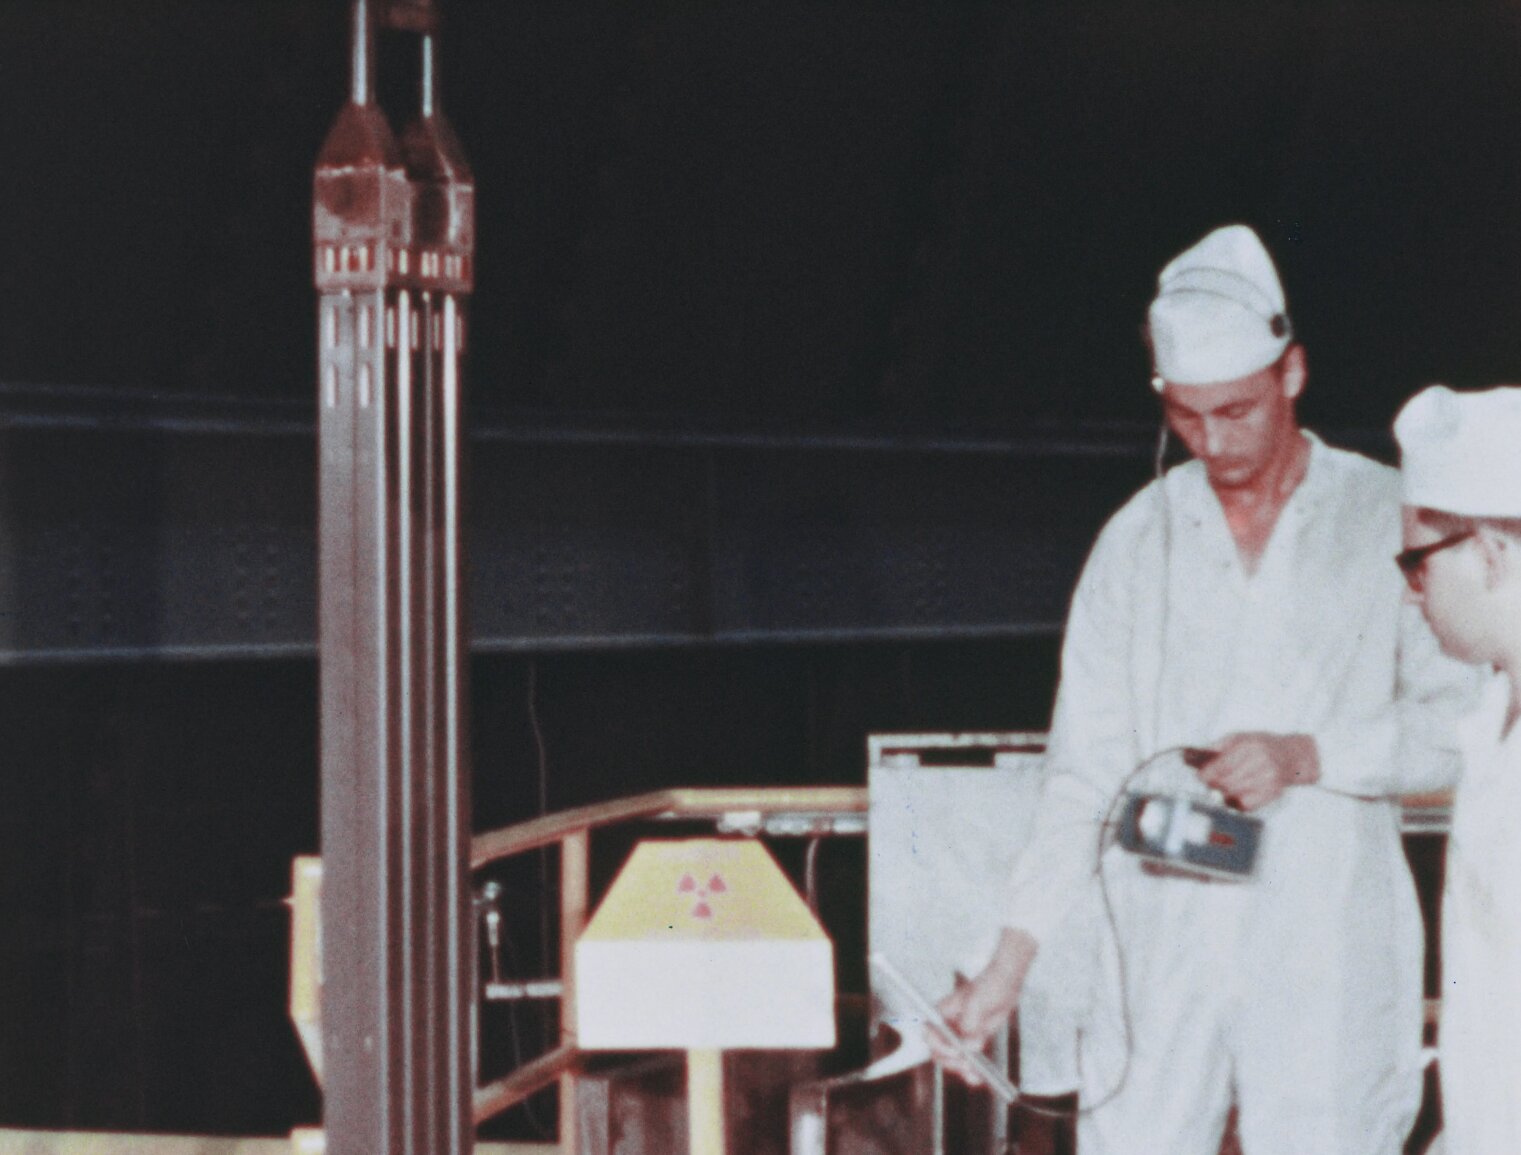 Men in white coveralls and caps look at geiger counter while standing near a nuclear superheat fuel assembly being loaded into BONUS. Dark background. Radiation sign on pedastal.